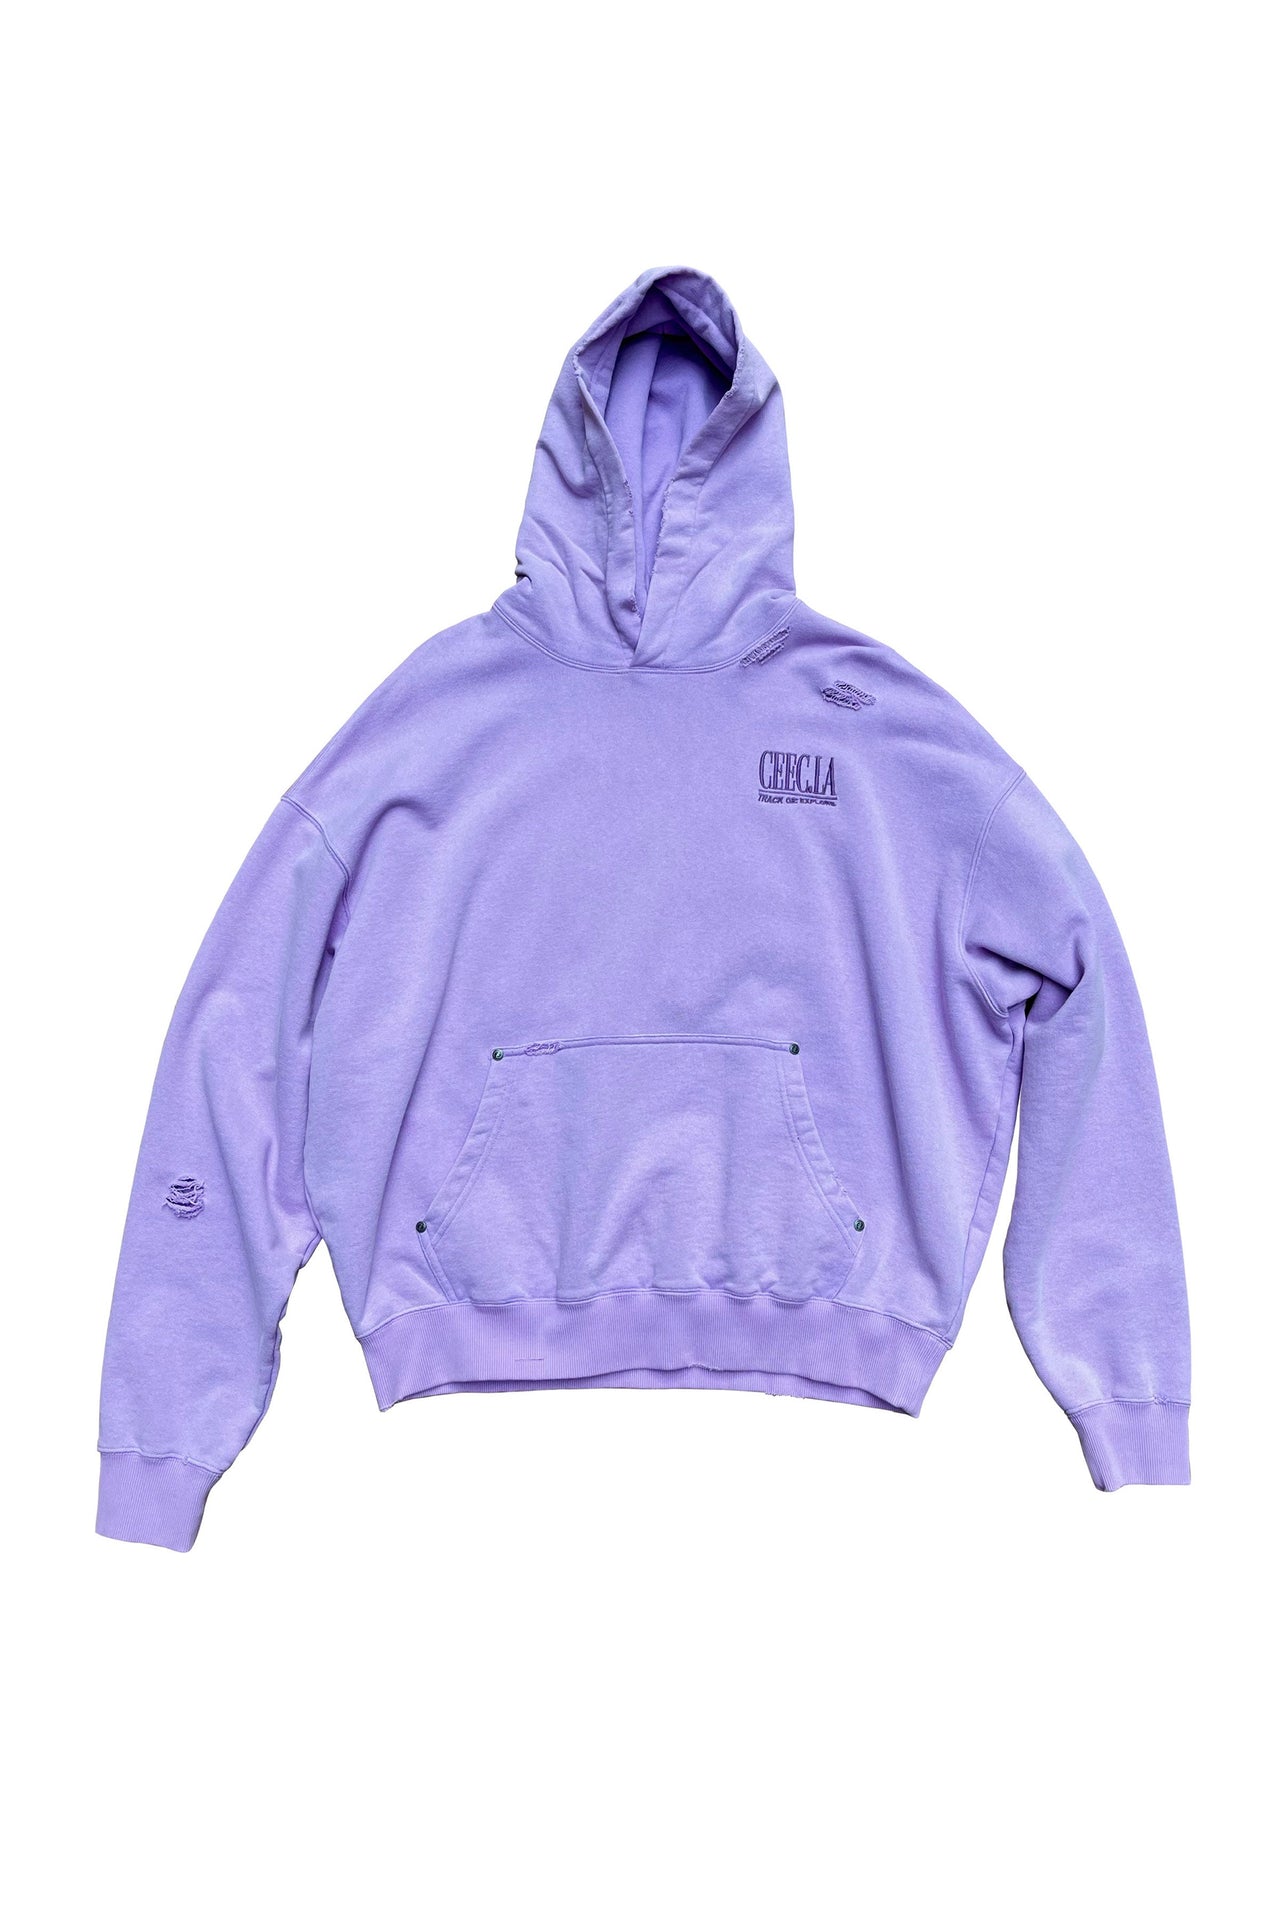 Classic Charm Graphic Embroidery Hoodie in Purple